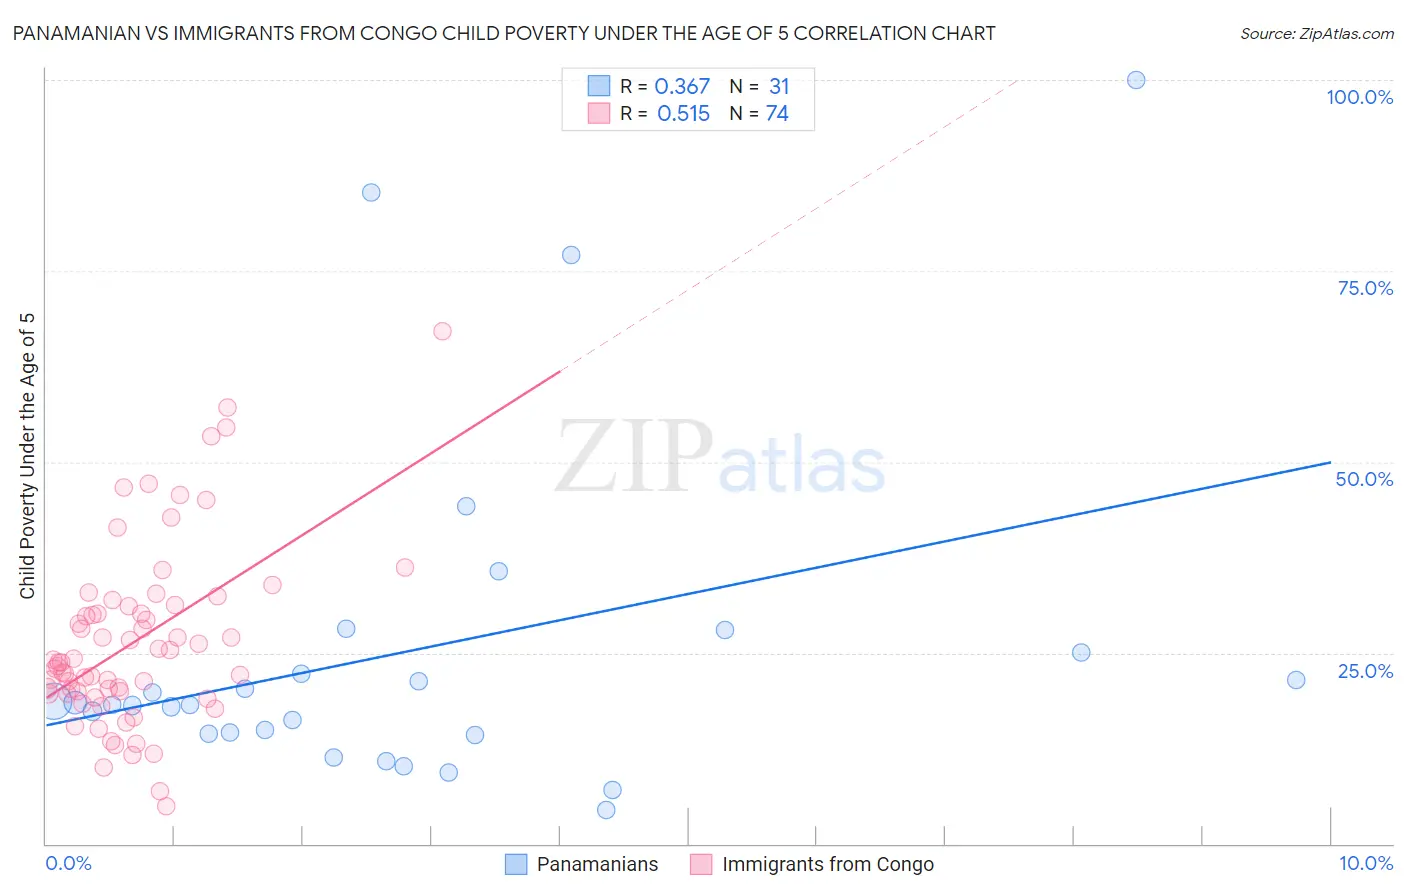 Panamanian vs Immigrants from Congo Child Poverty Under the Age of 5